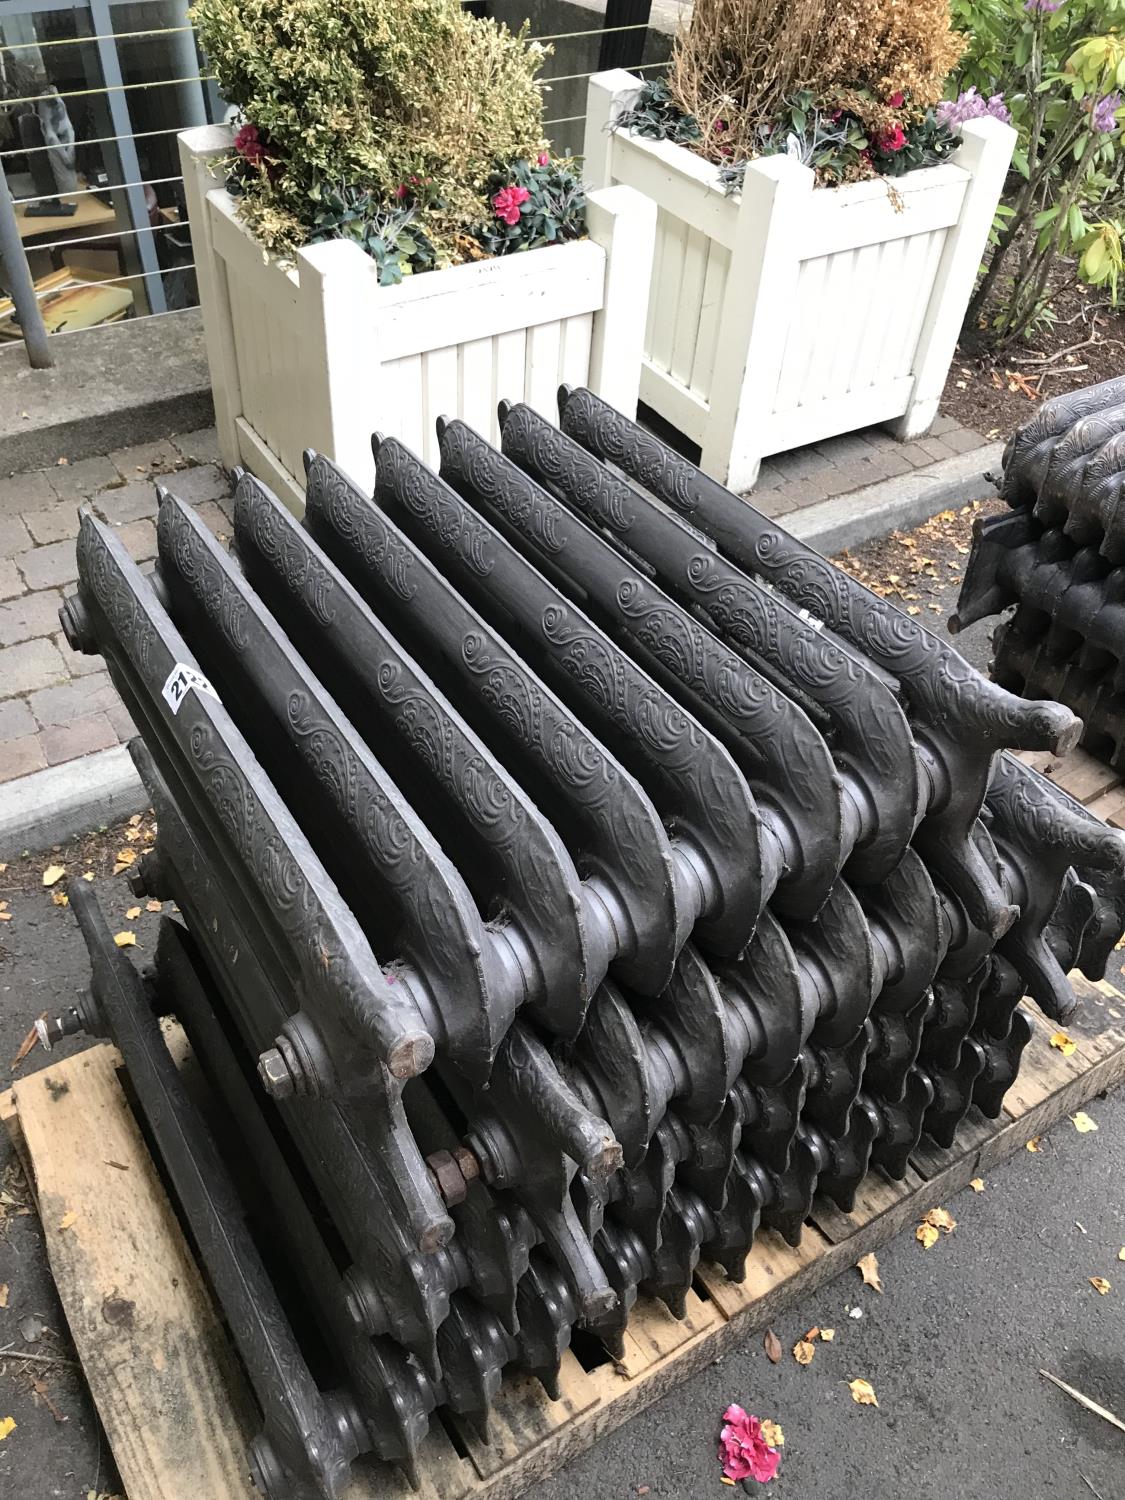 Victorian style cast iron radiator (with the option on the rest).